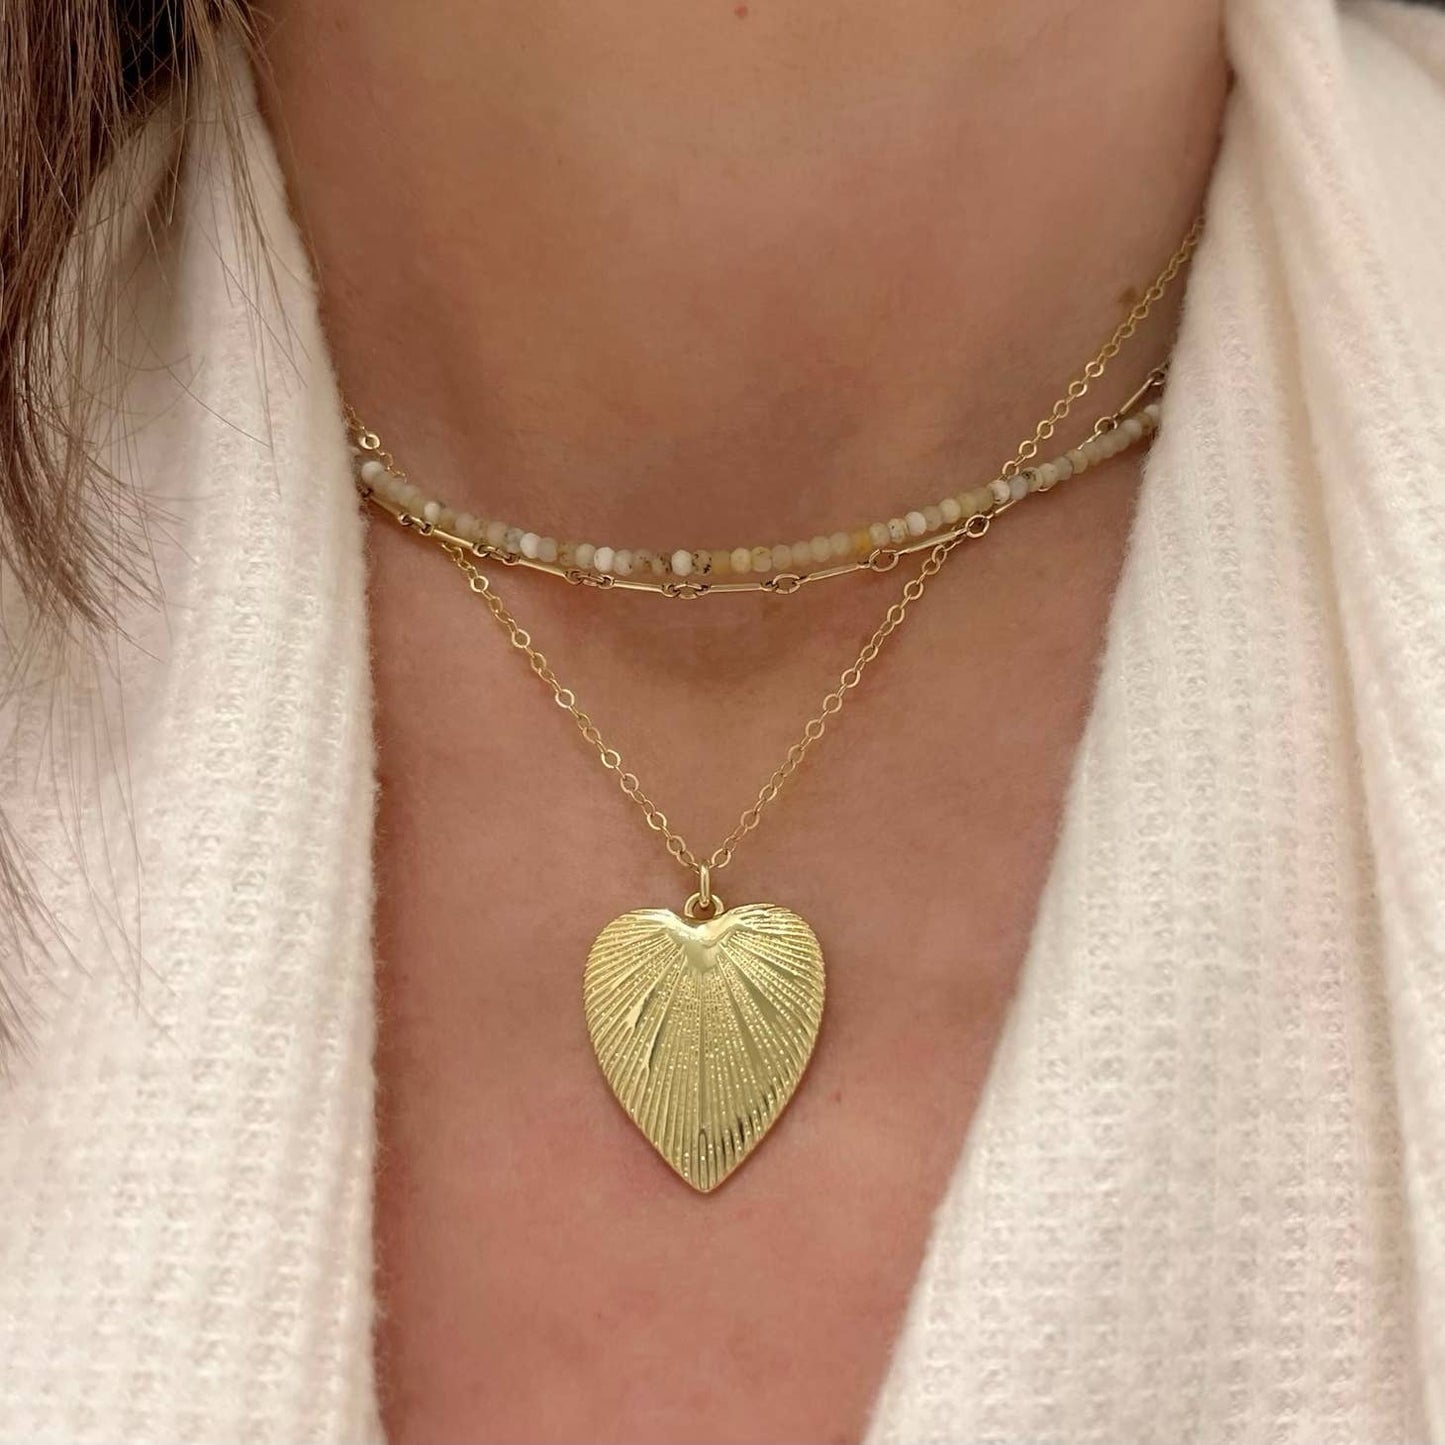 Beaming Heart Necklace